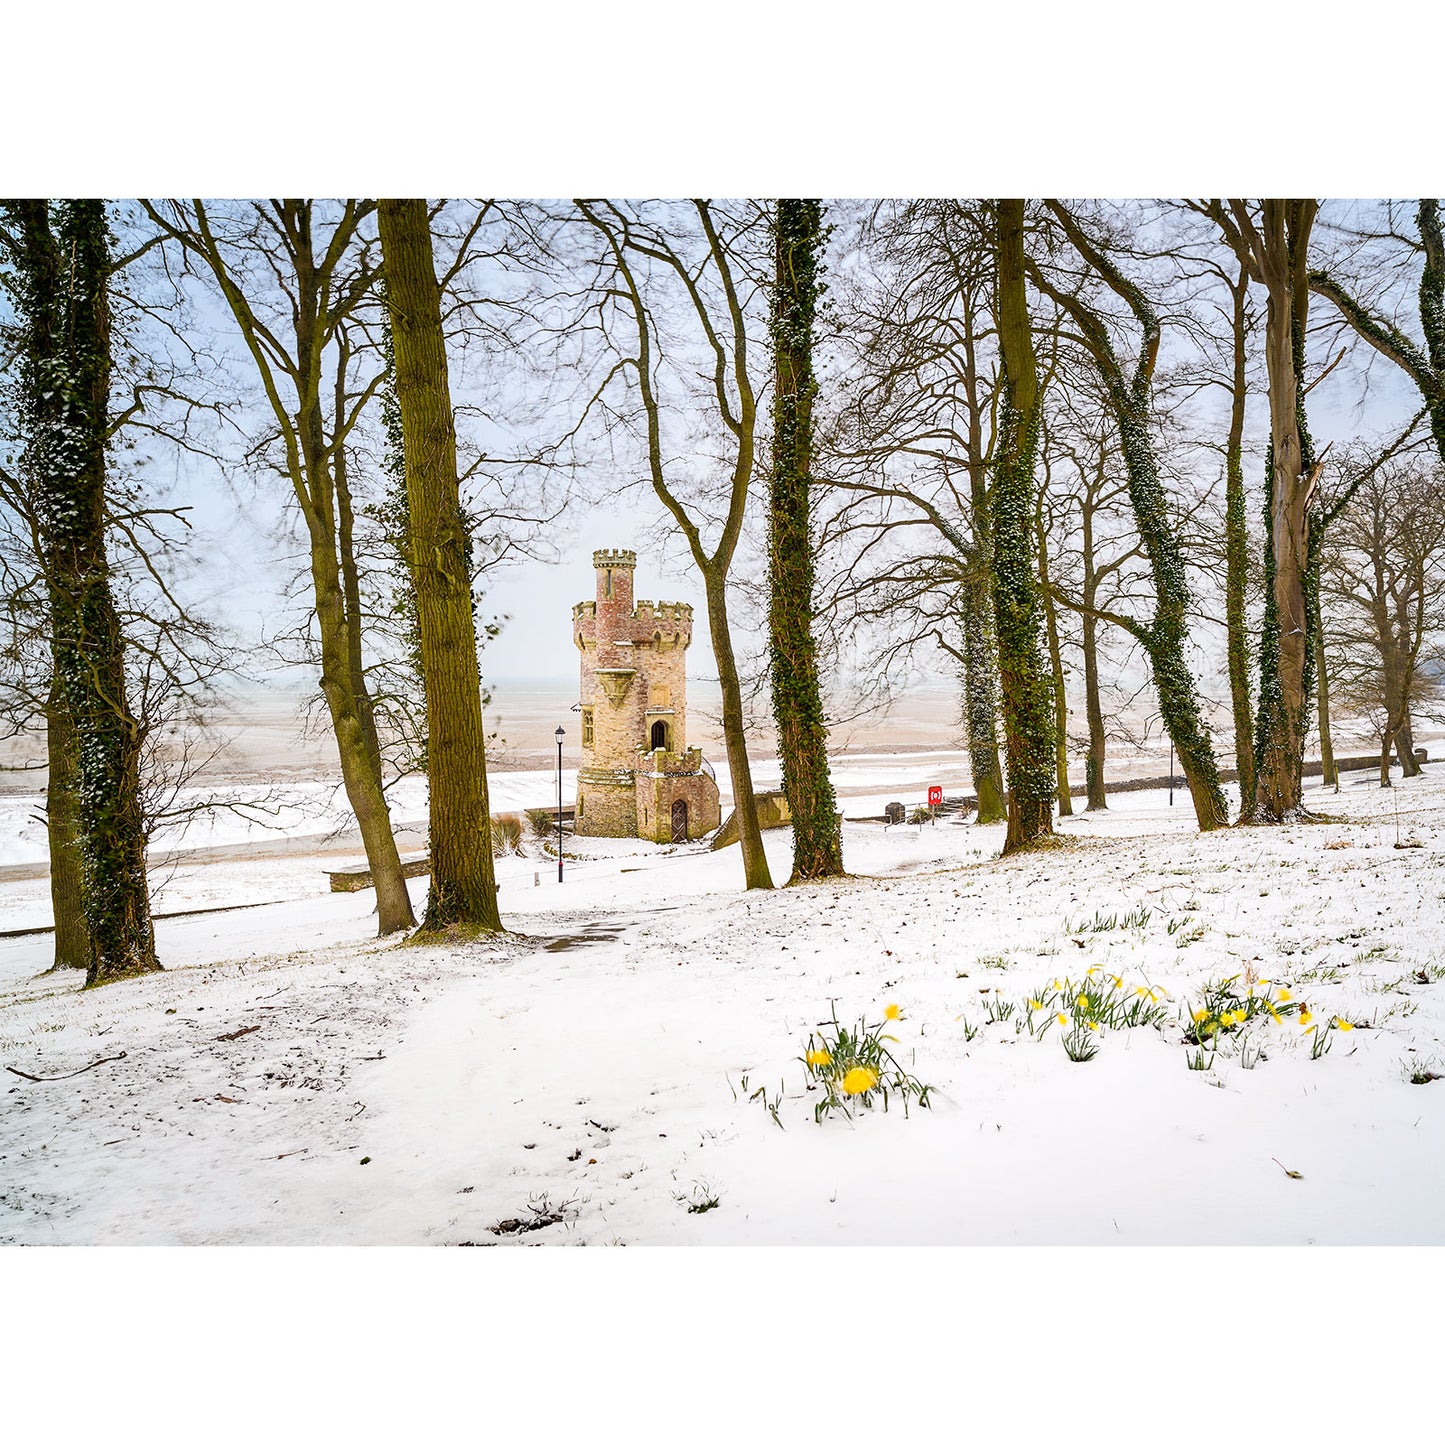 A historical Appley Tower amid a snowy landscape with daffodils in the foreground and a line of bare trees on the Isle, captured by Available Light Photography.